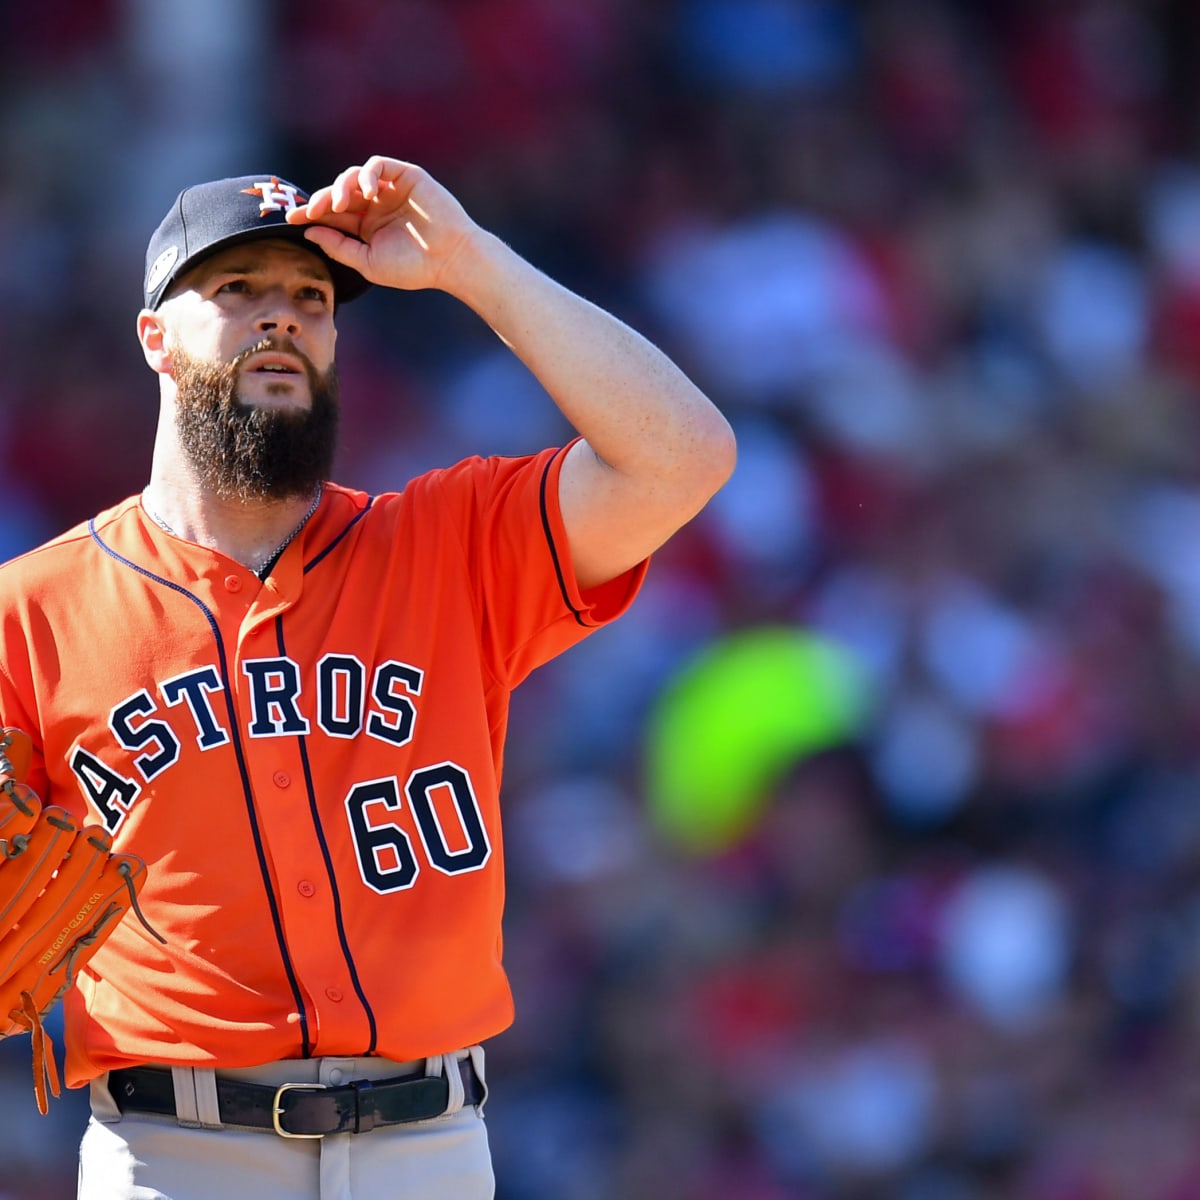 Dallas Keuchel of the Houston Astros waits on the field before the